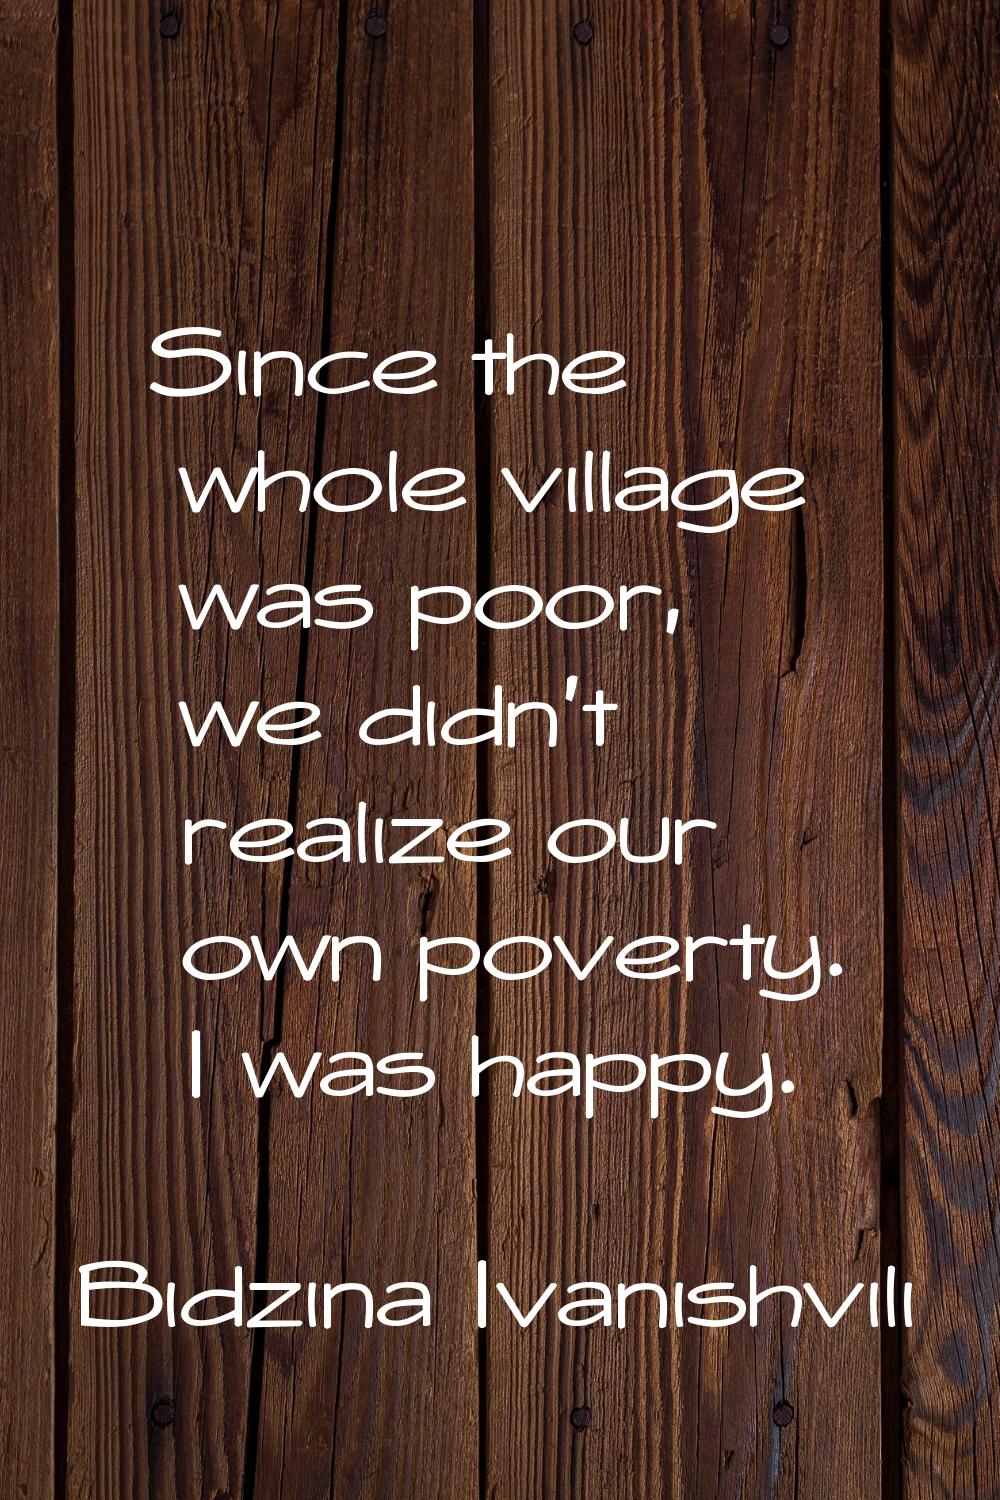 Since the whole village was poor, we didn't realize our own poverty. I was happy.